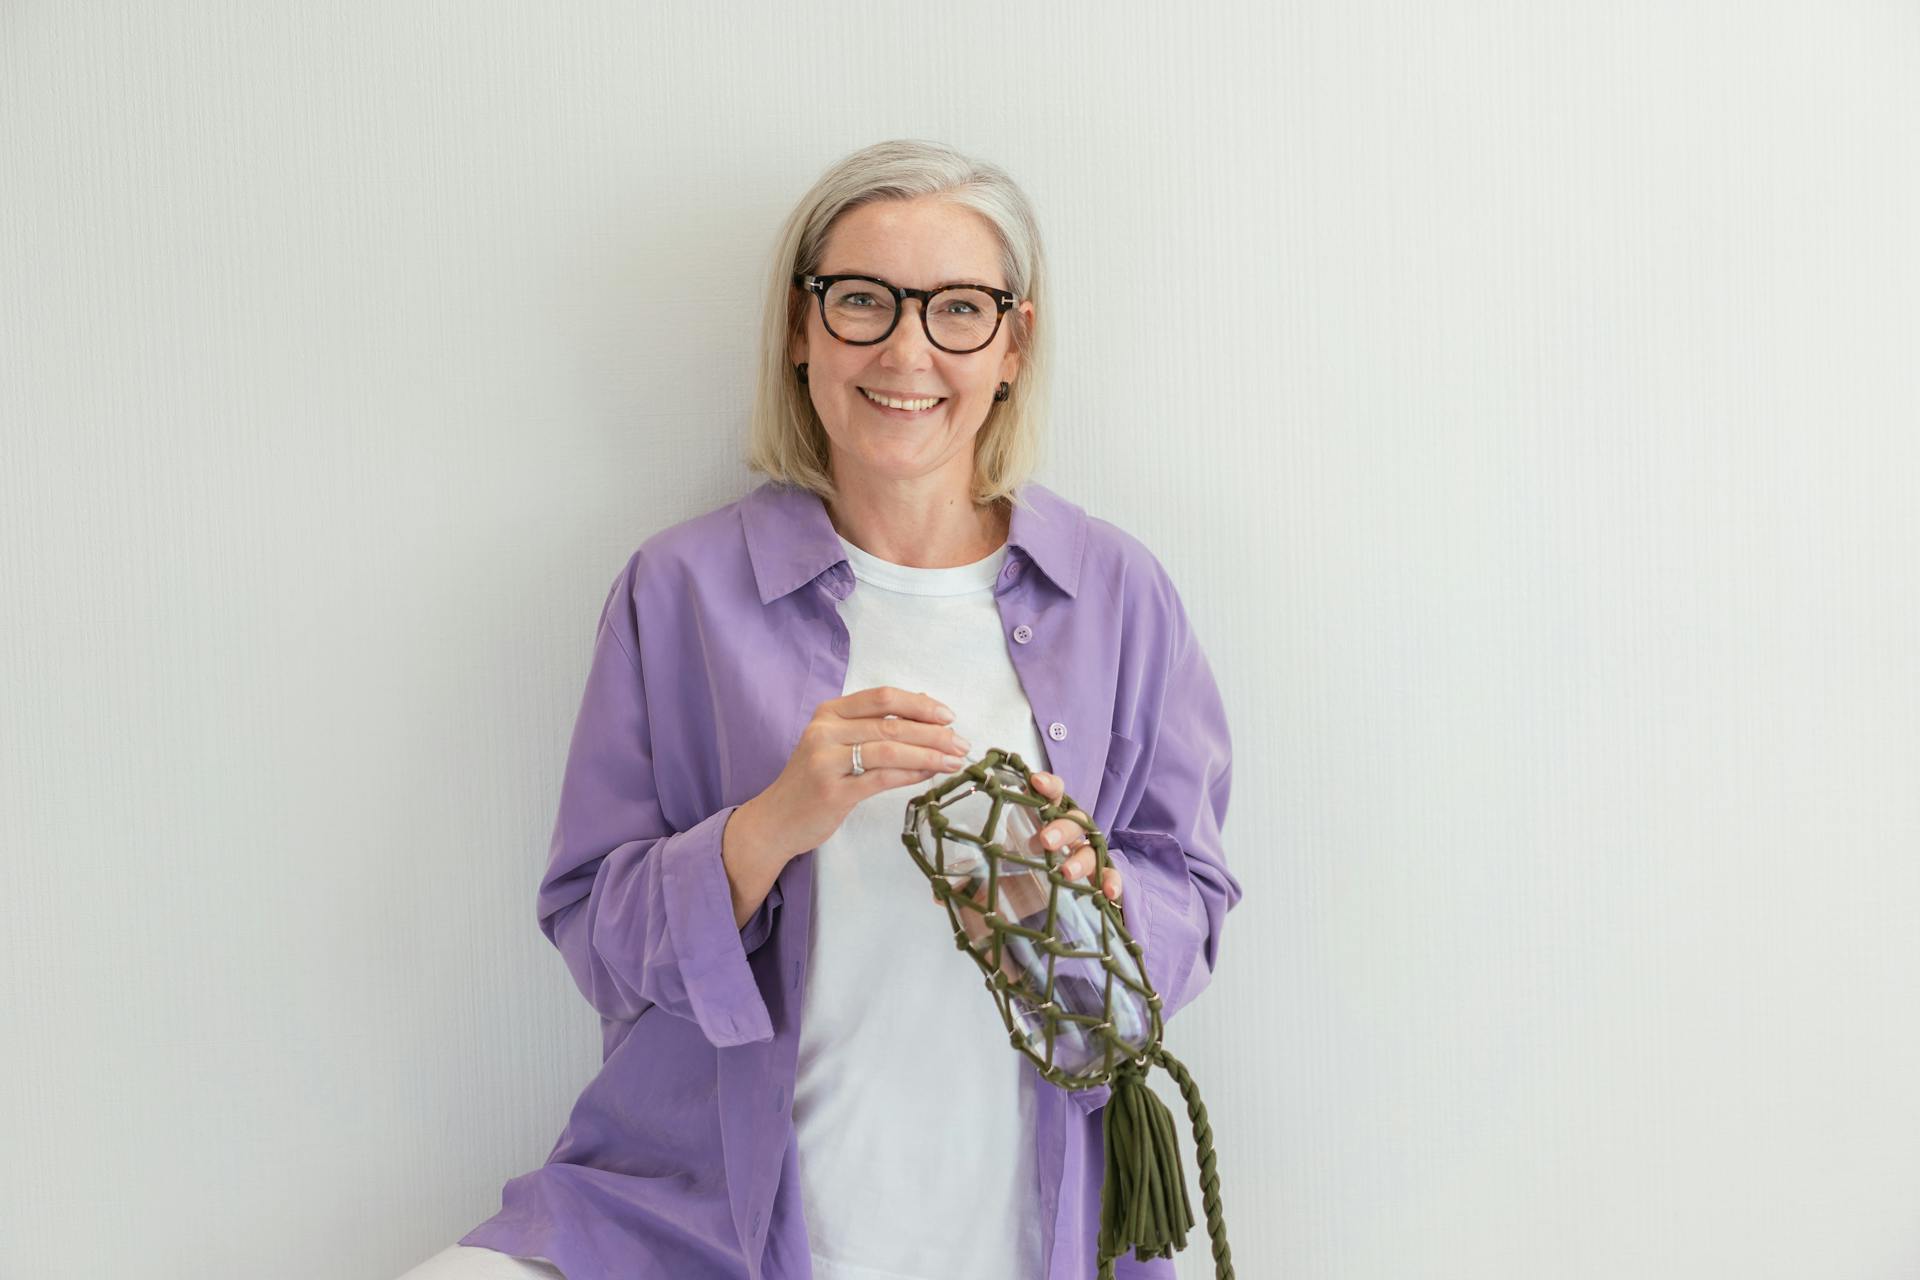 A smiling old woman holding a bottle | Source: Pexels